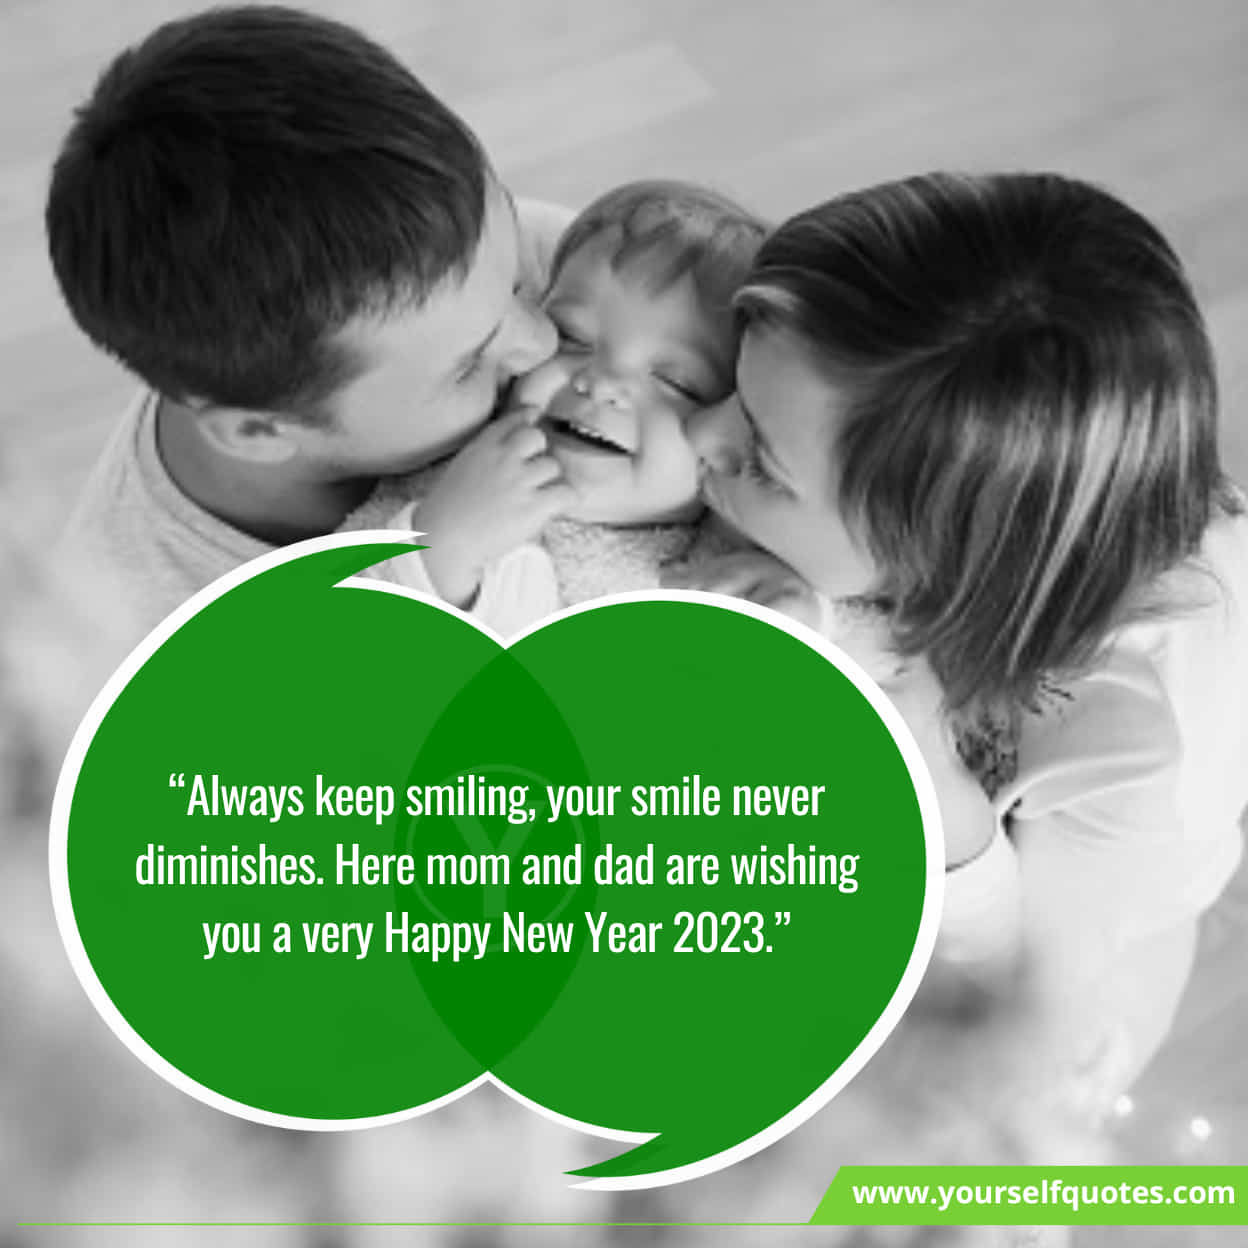 Inspirational Alluring New Year Wishes For Daughter